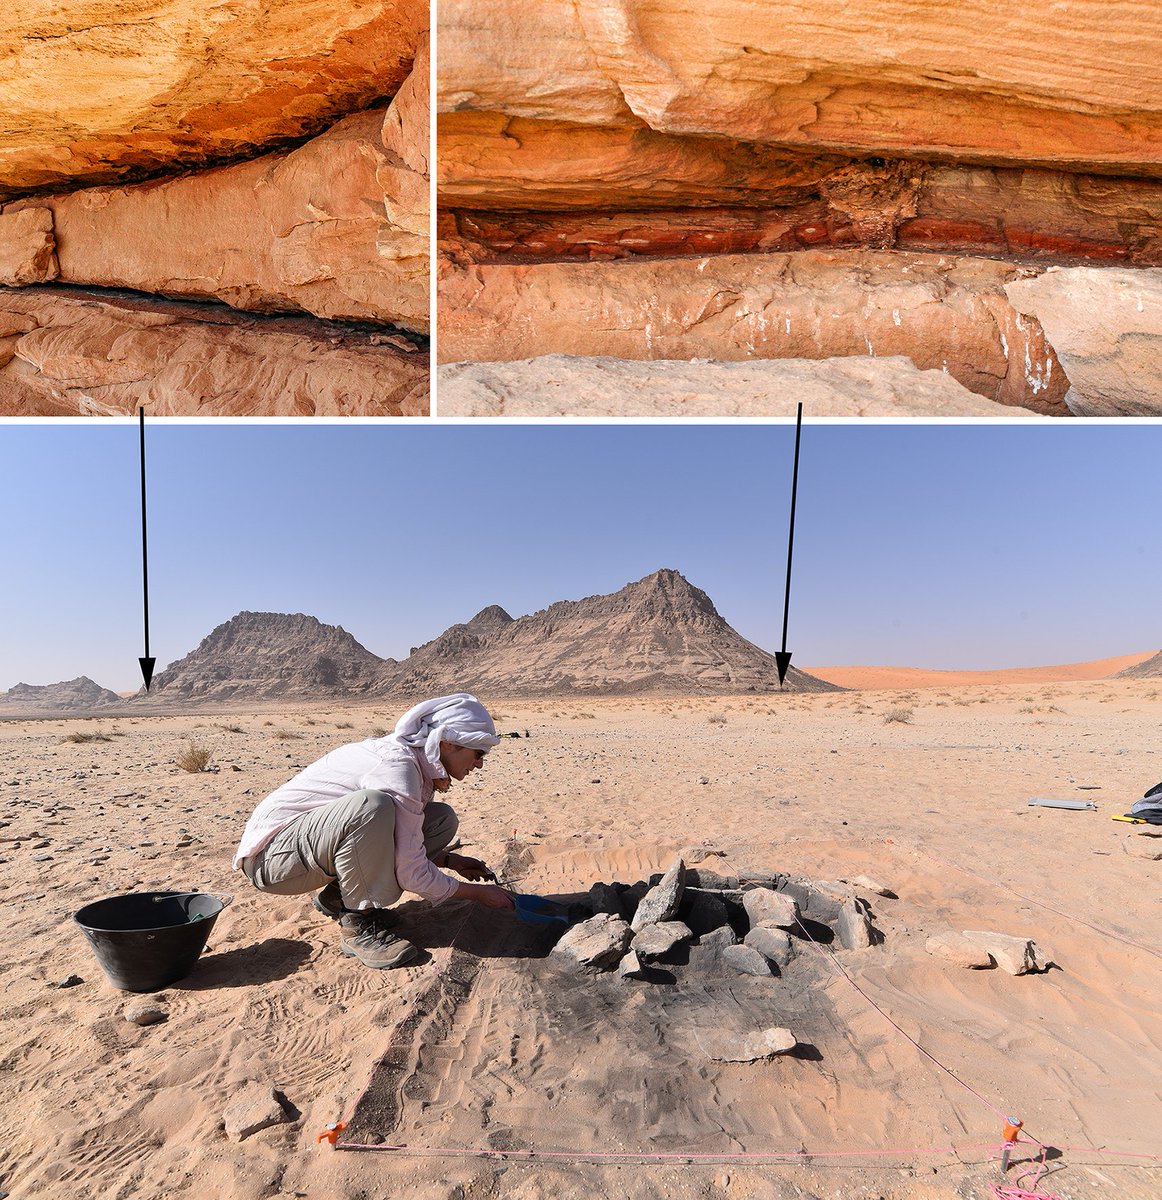 “Plant, pigment, and bone processing in the Neolithic of northern Arabia–New evidence from Use-wear analysis of grinding tools at Jebel Oraf” Congratulation @AnitaRadini and co-authors G.Lucarini, M.Guagnin, C.Shipton, A.M. Alsharekh & M.Petragliaon on their important new paper.